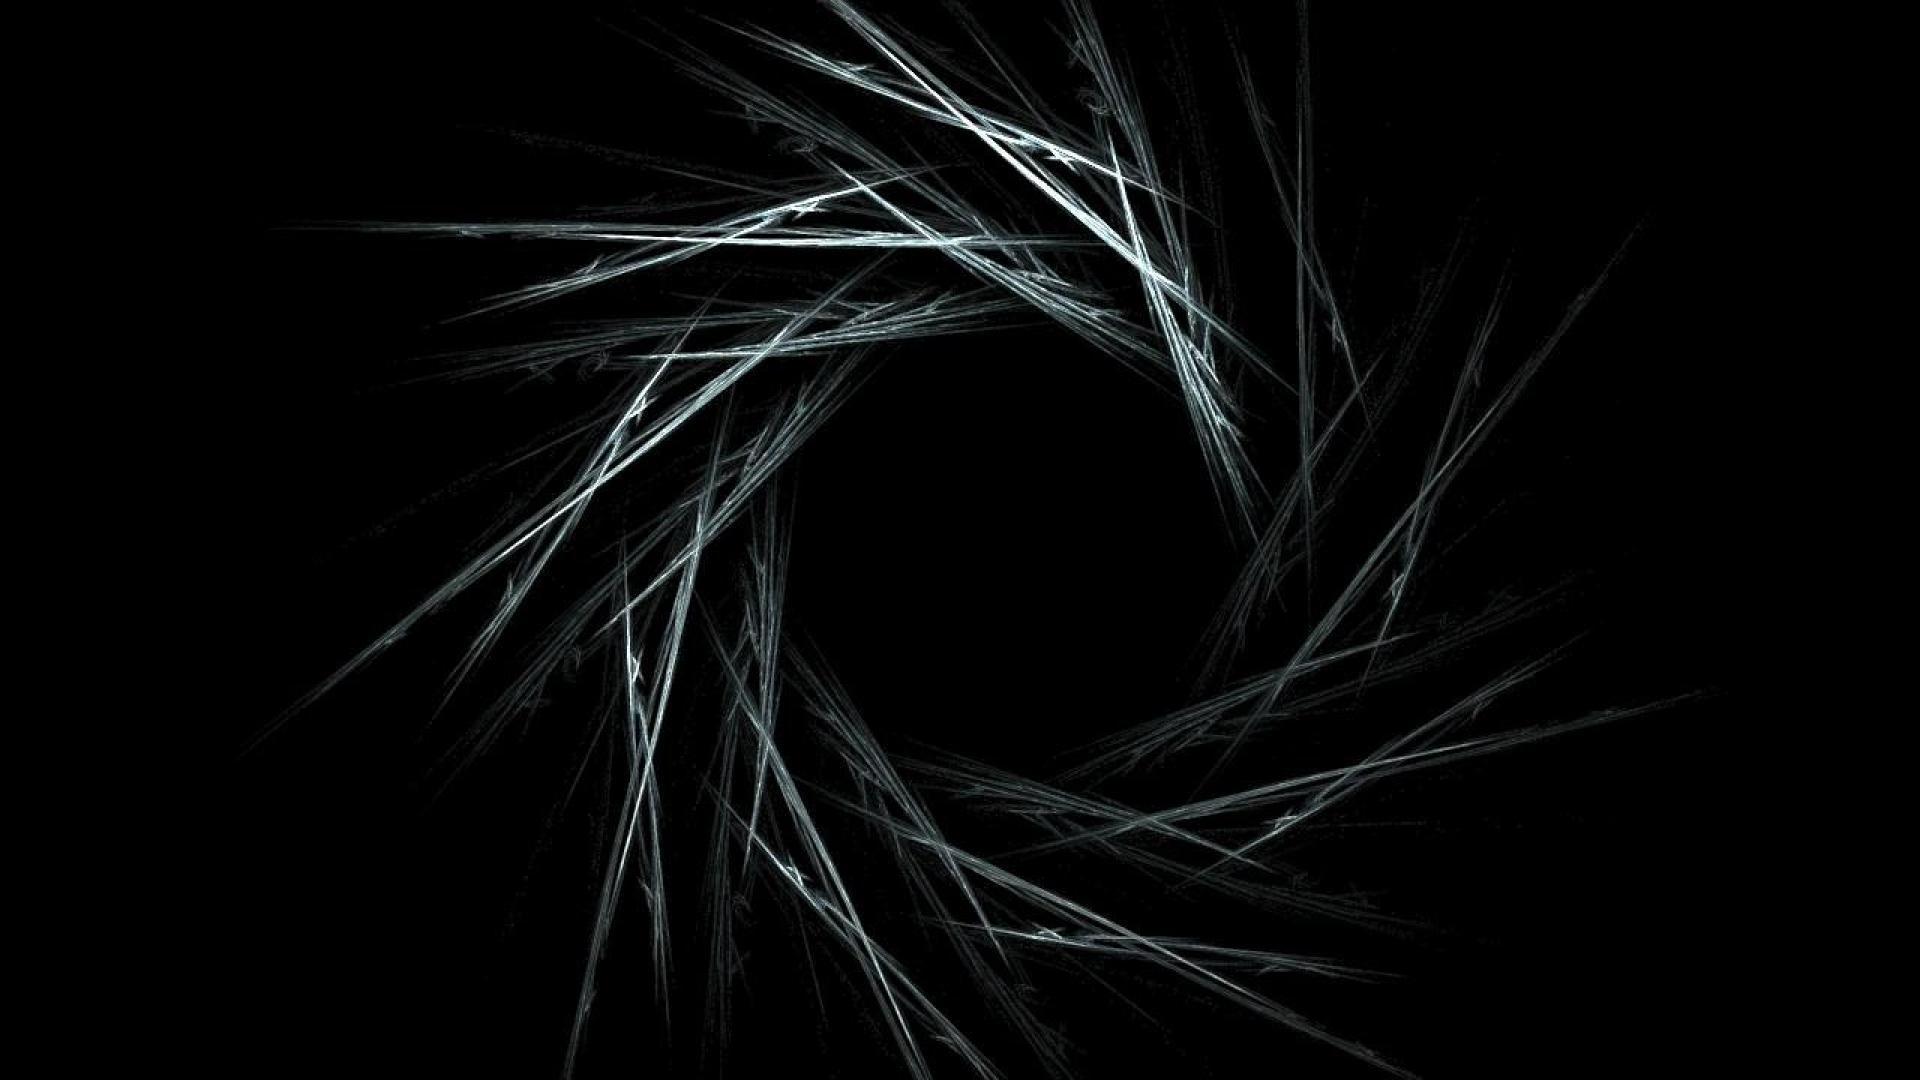 Cool Black and White Abstract Wallpaper